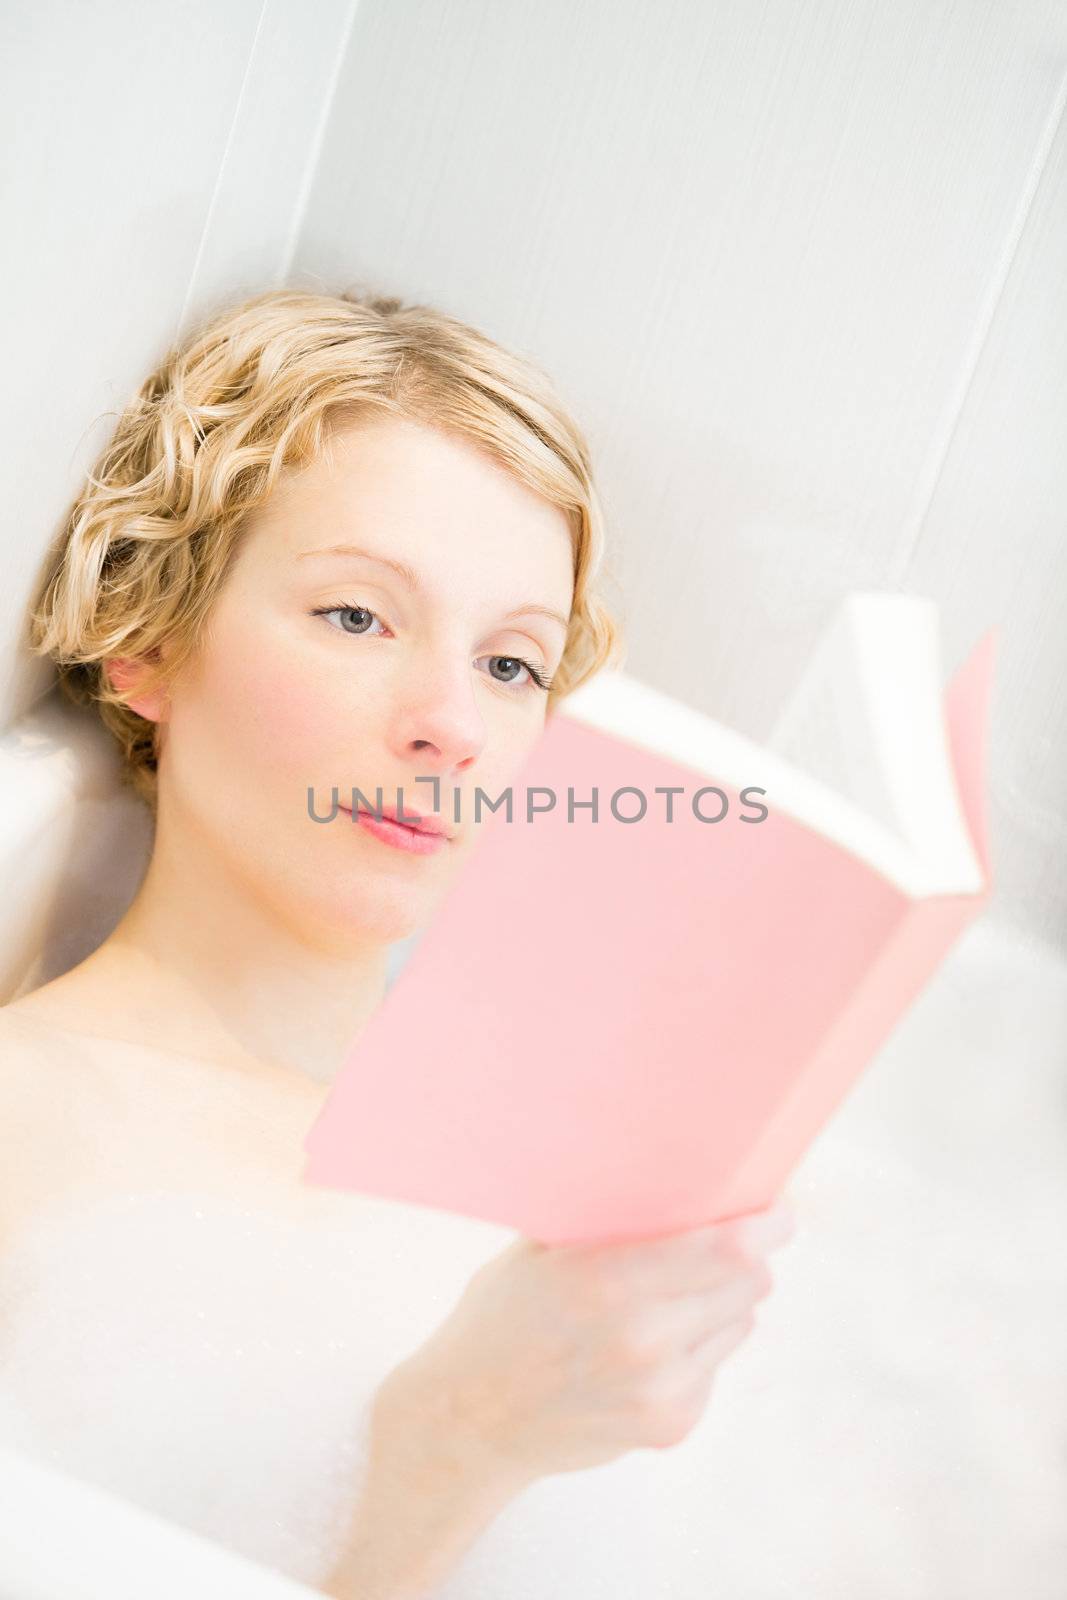 Young woman relaxing and reading a book in the bath by aetb